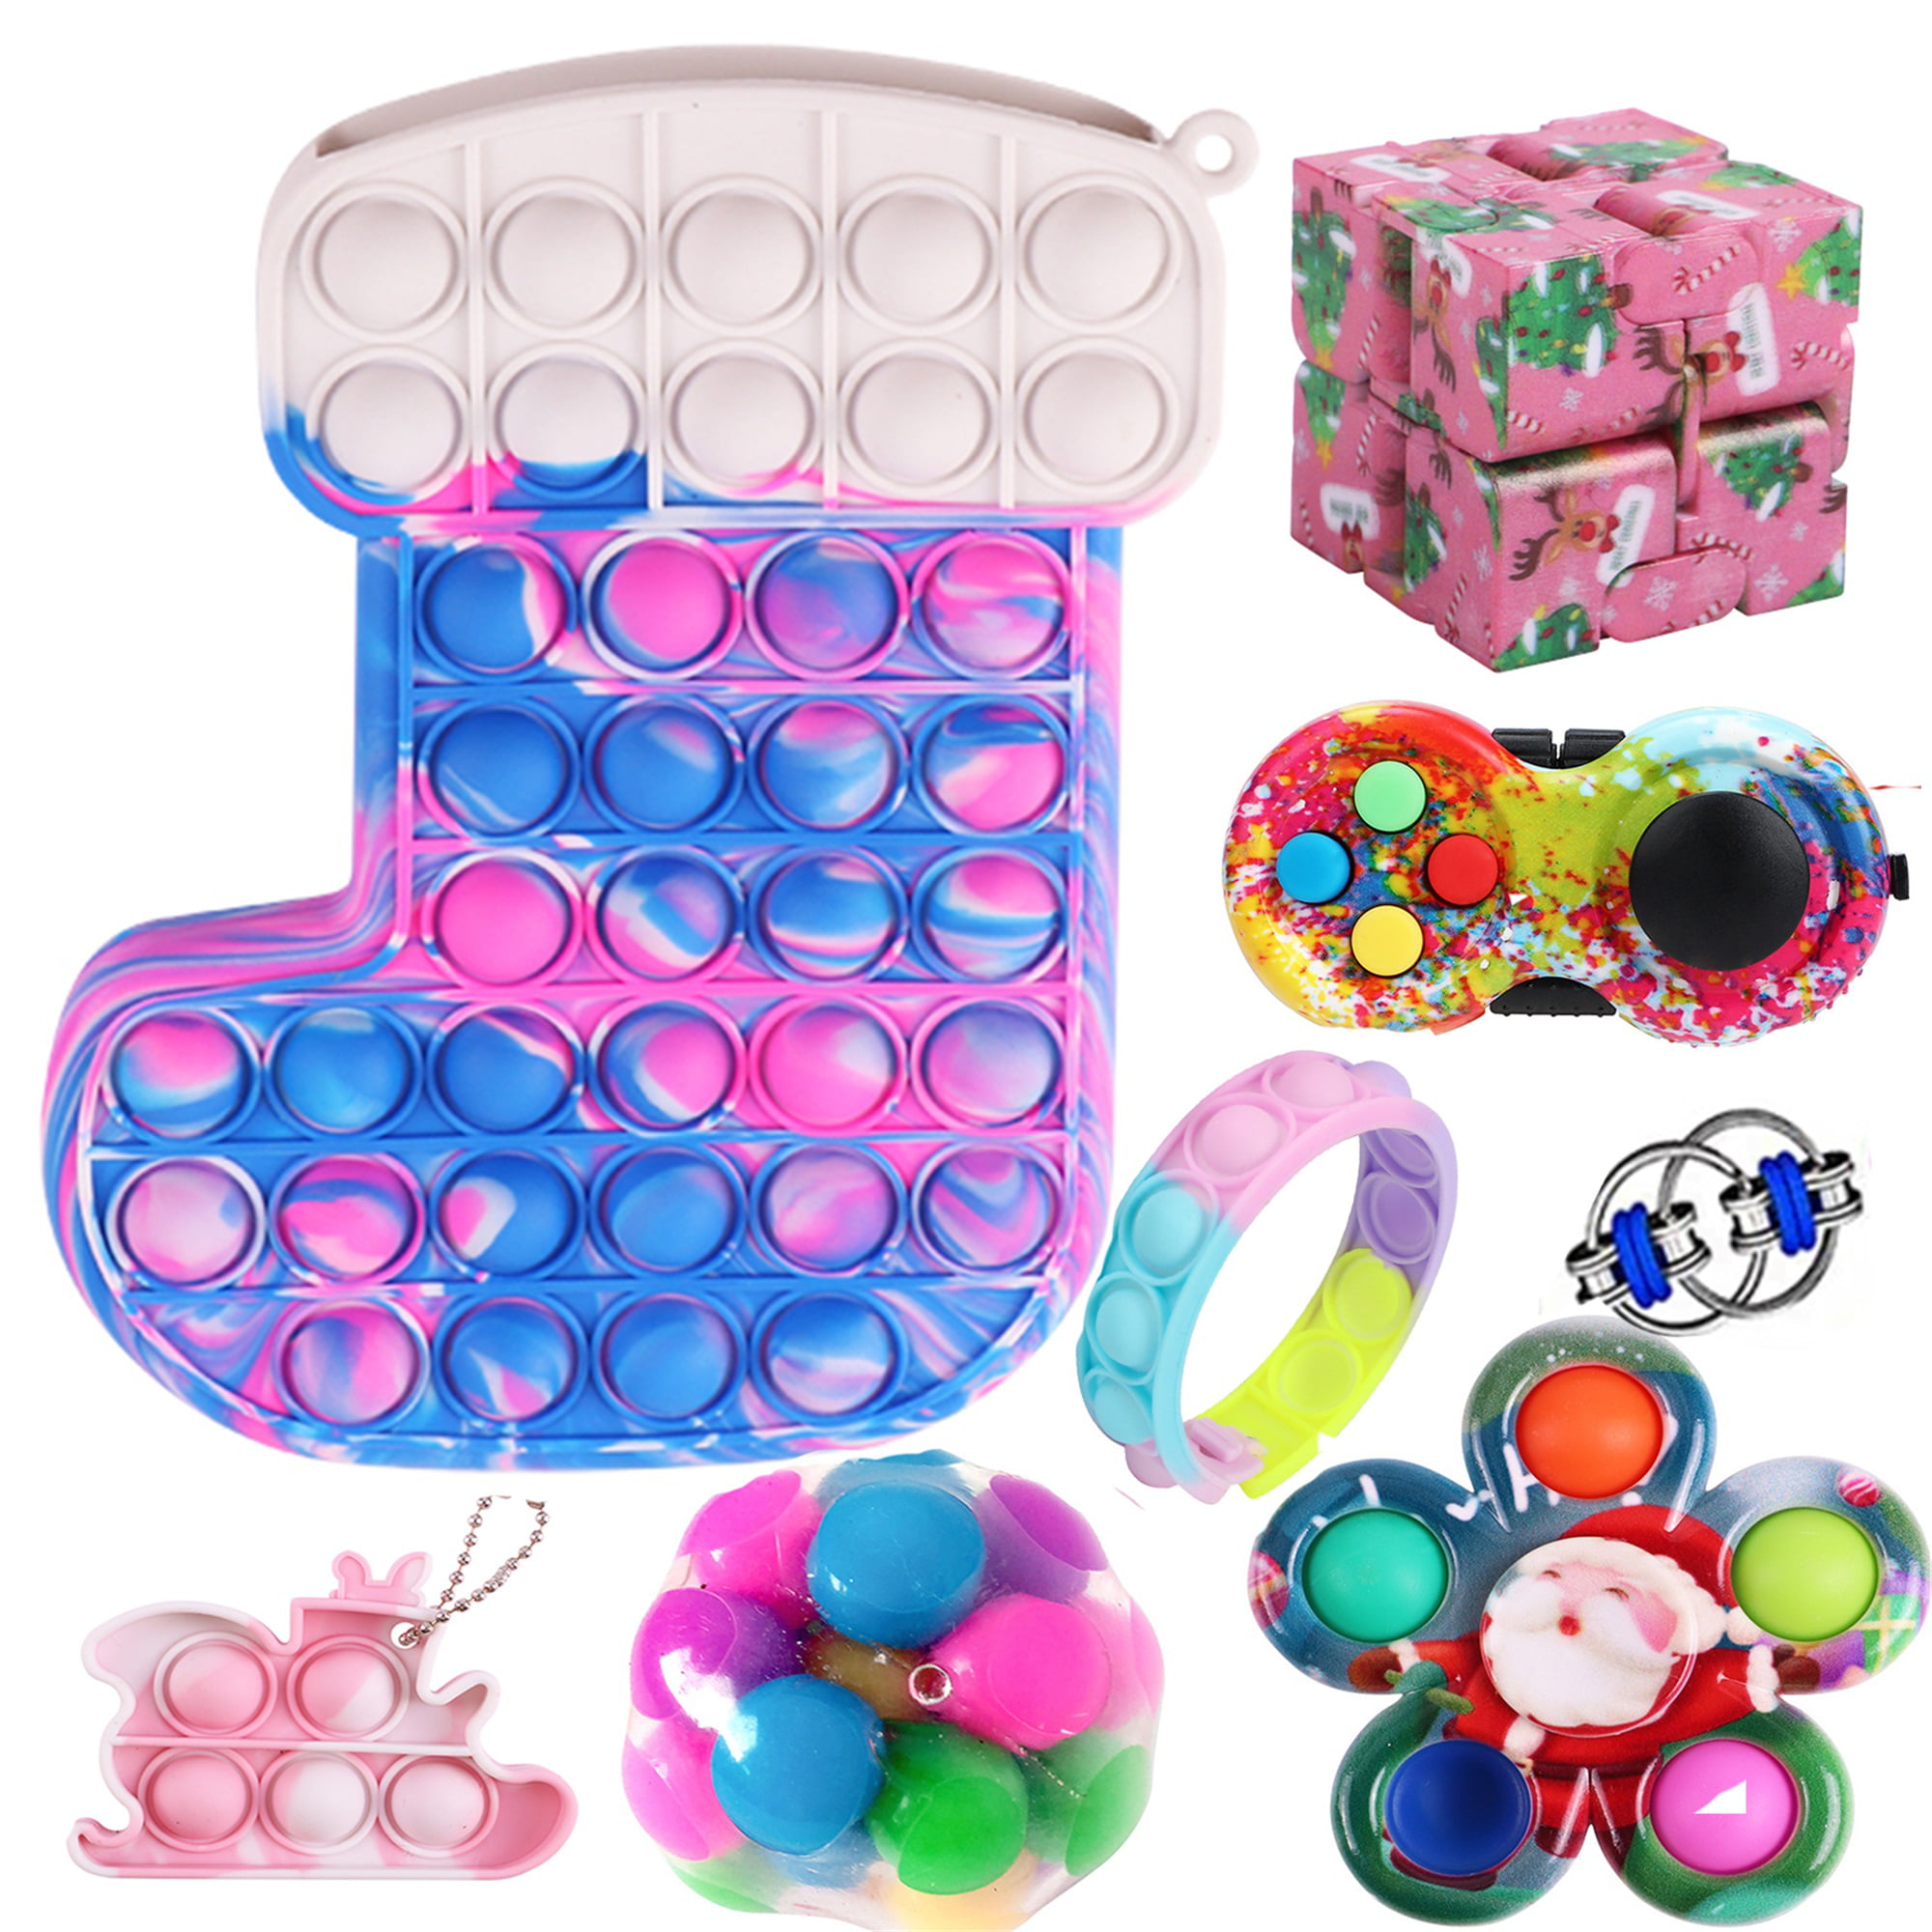 Small Fidget Cube Key Chain Toy Anxiety Relief Stocking Stuffers Pink on White 